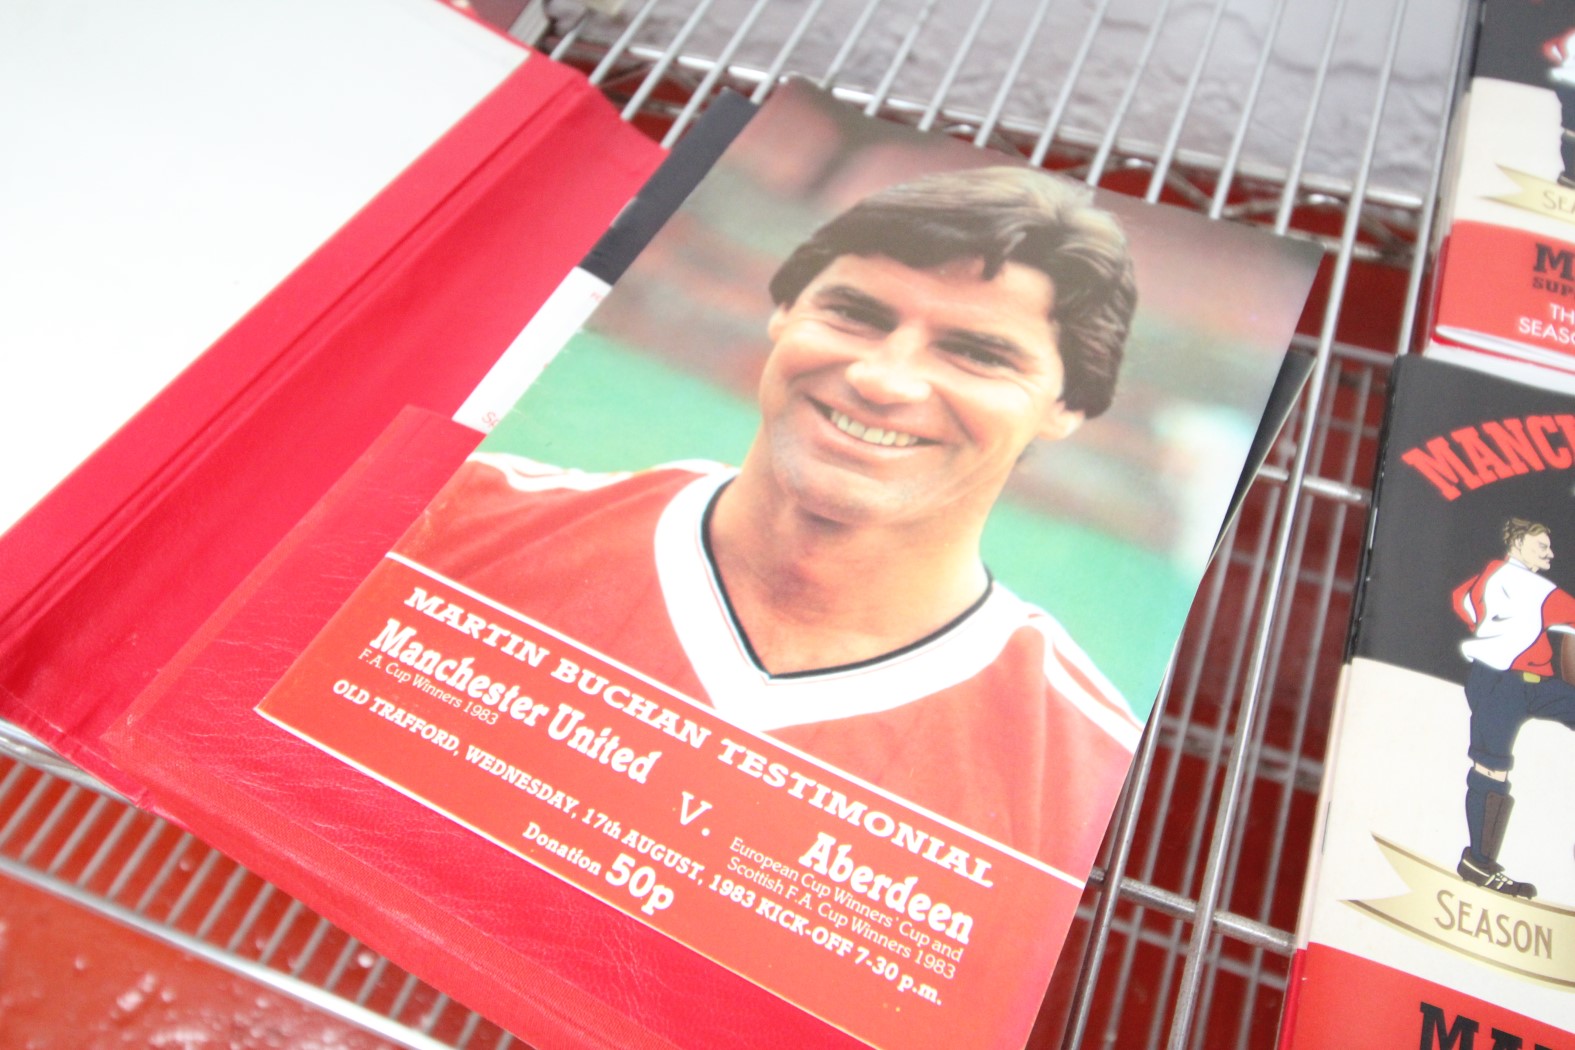 SINGLE RED MANCHESTER UNITED MATCH DAY PROGRAM FOLDER, SEASON 1983 / 84, AND CONTENTS OF 25x PLUS - Image 2 of 2